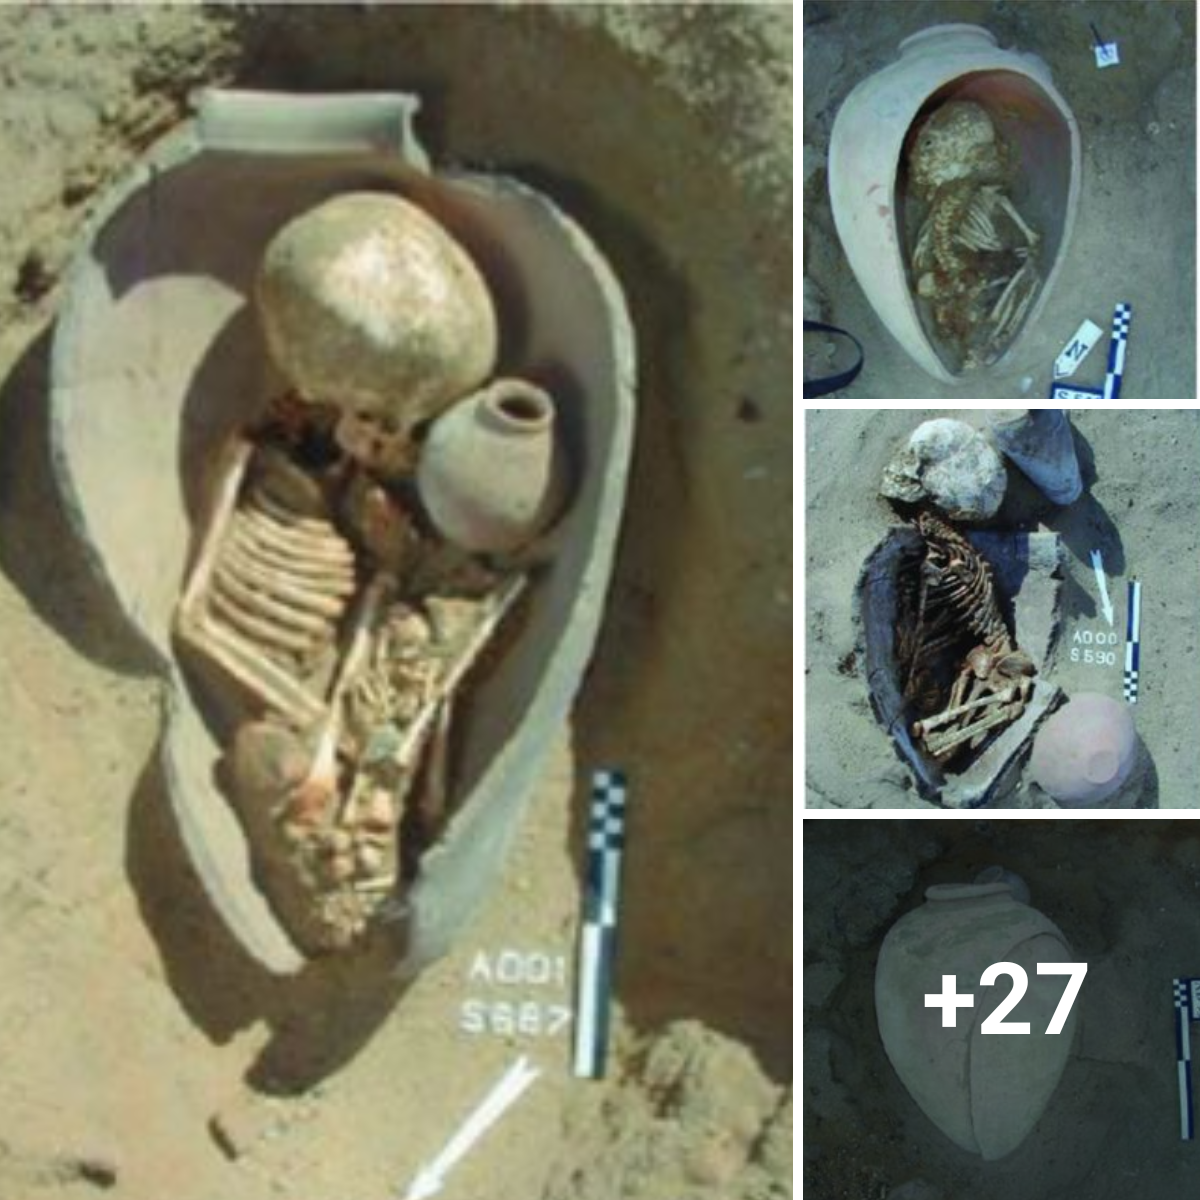 The practice of burying the deceased in ceramic jars dates back to ancient Egypt.